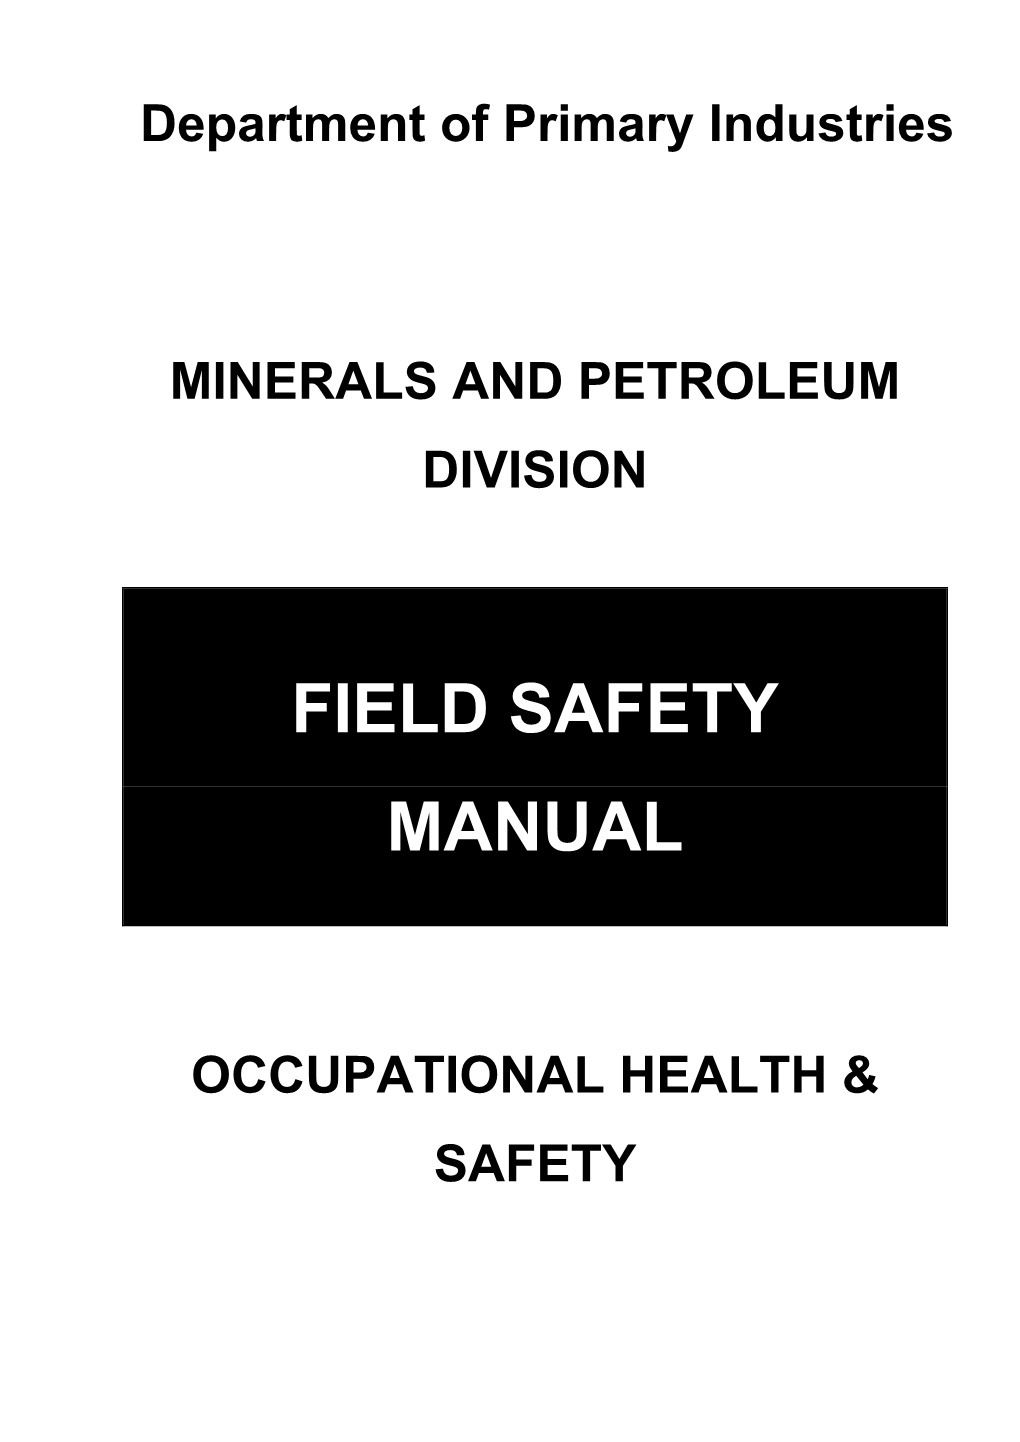 Field Safety Manual